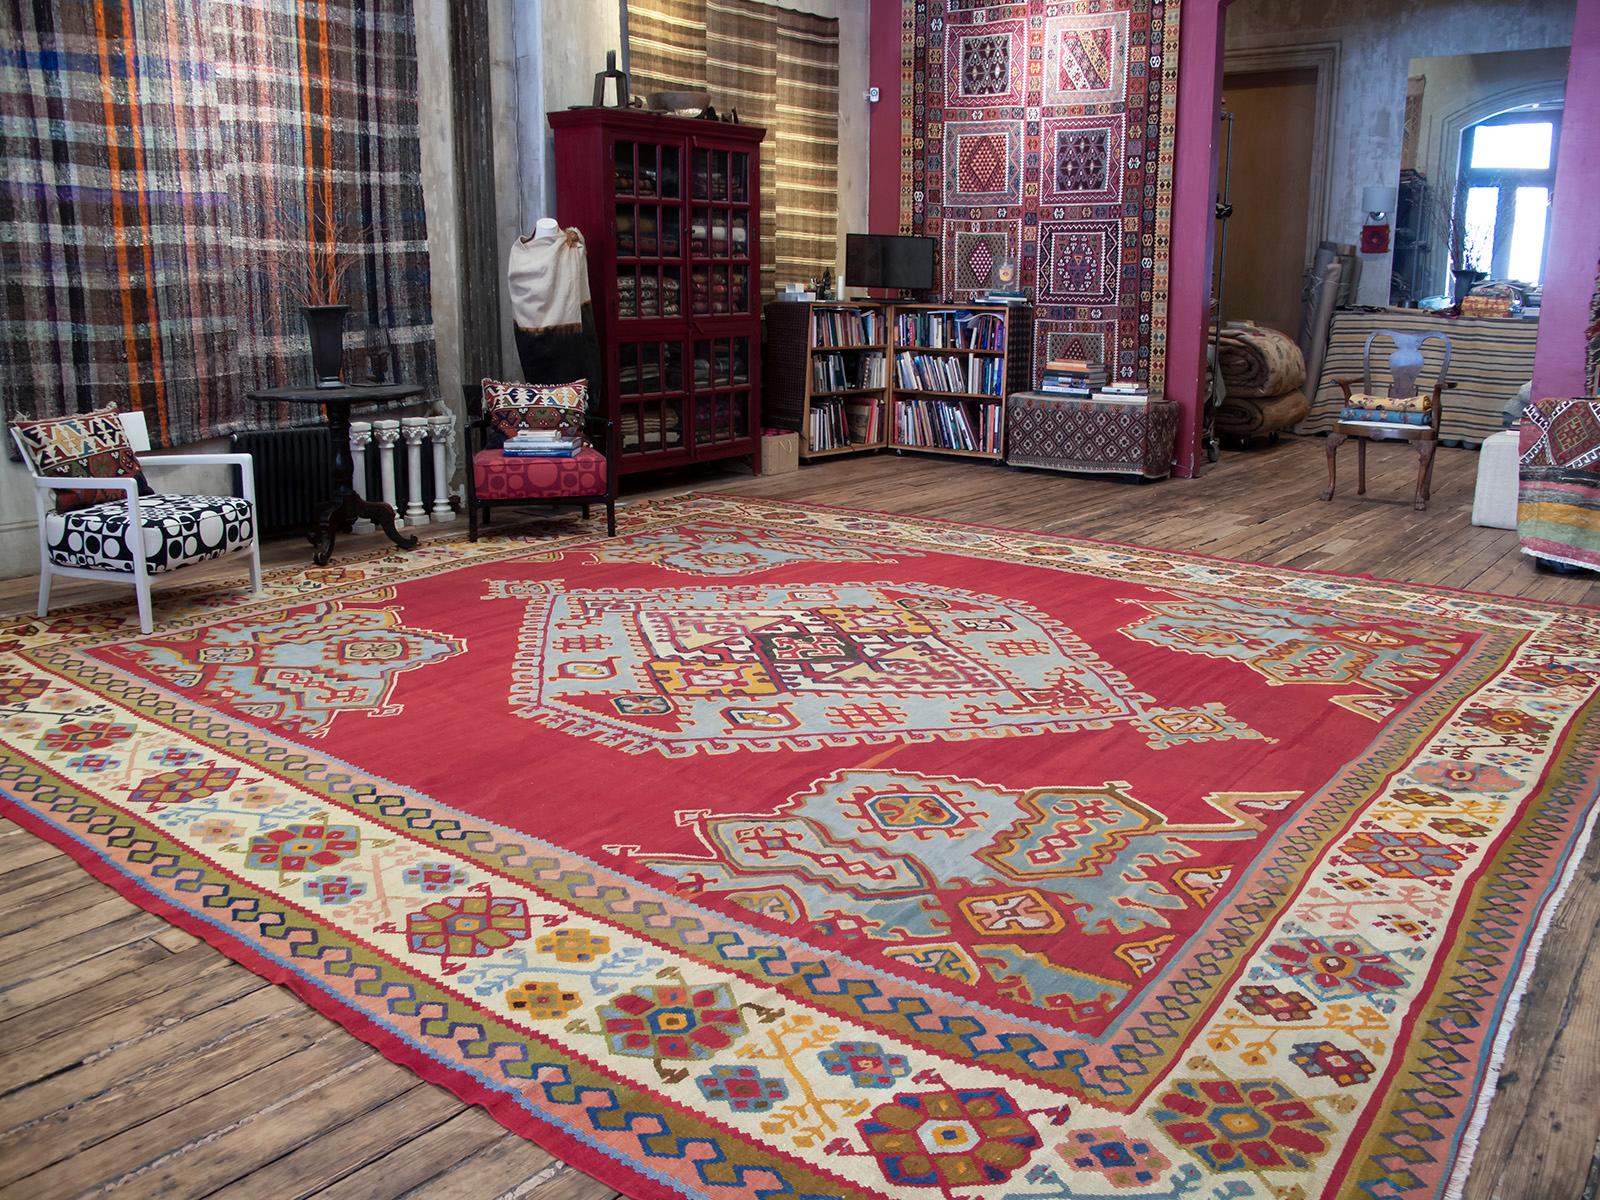 A very large antique kilim, woven in the Oushak region of Western Turkey, displaying the classic central medallion design and a dazzling color palette. Such kilims were contemporary with the many antique Oushak carpets woven at end of the 19th